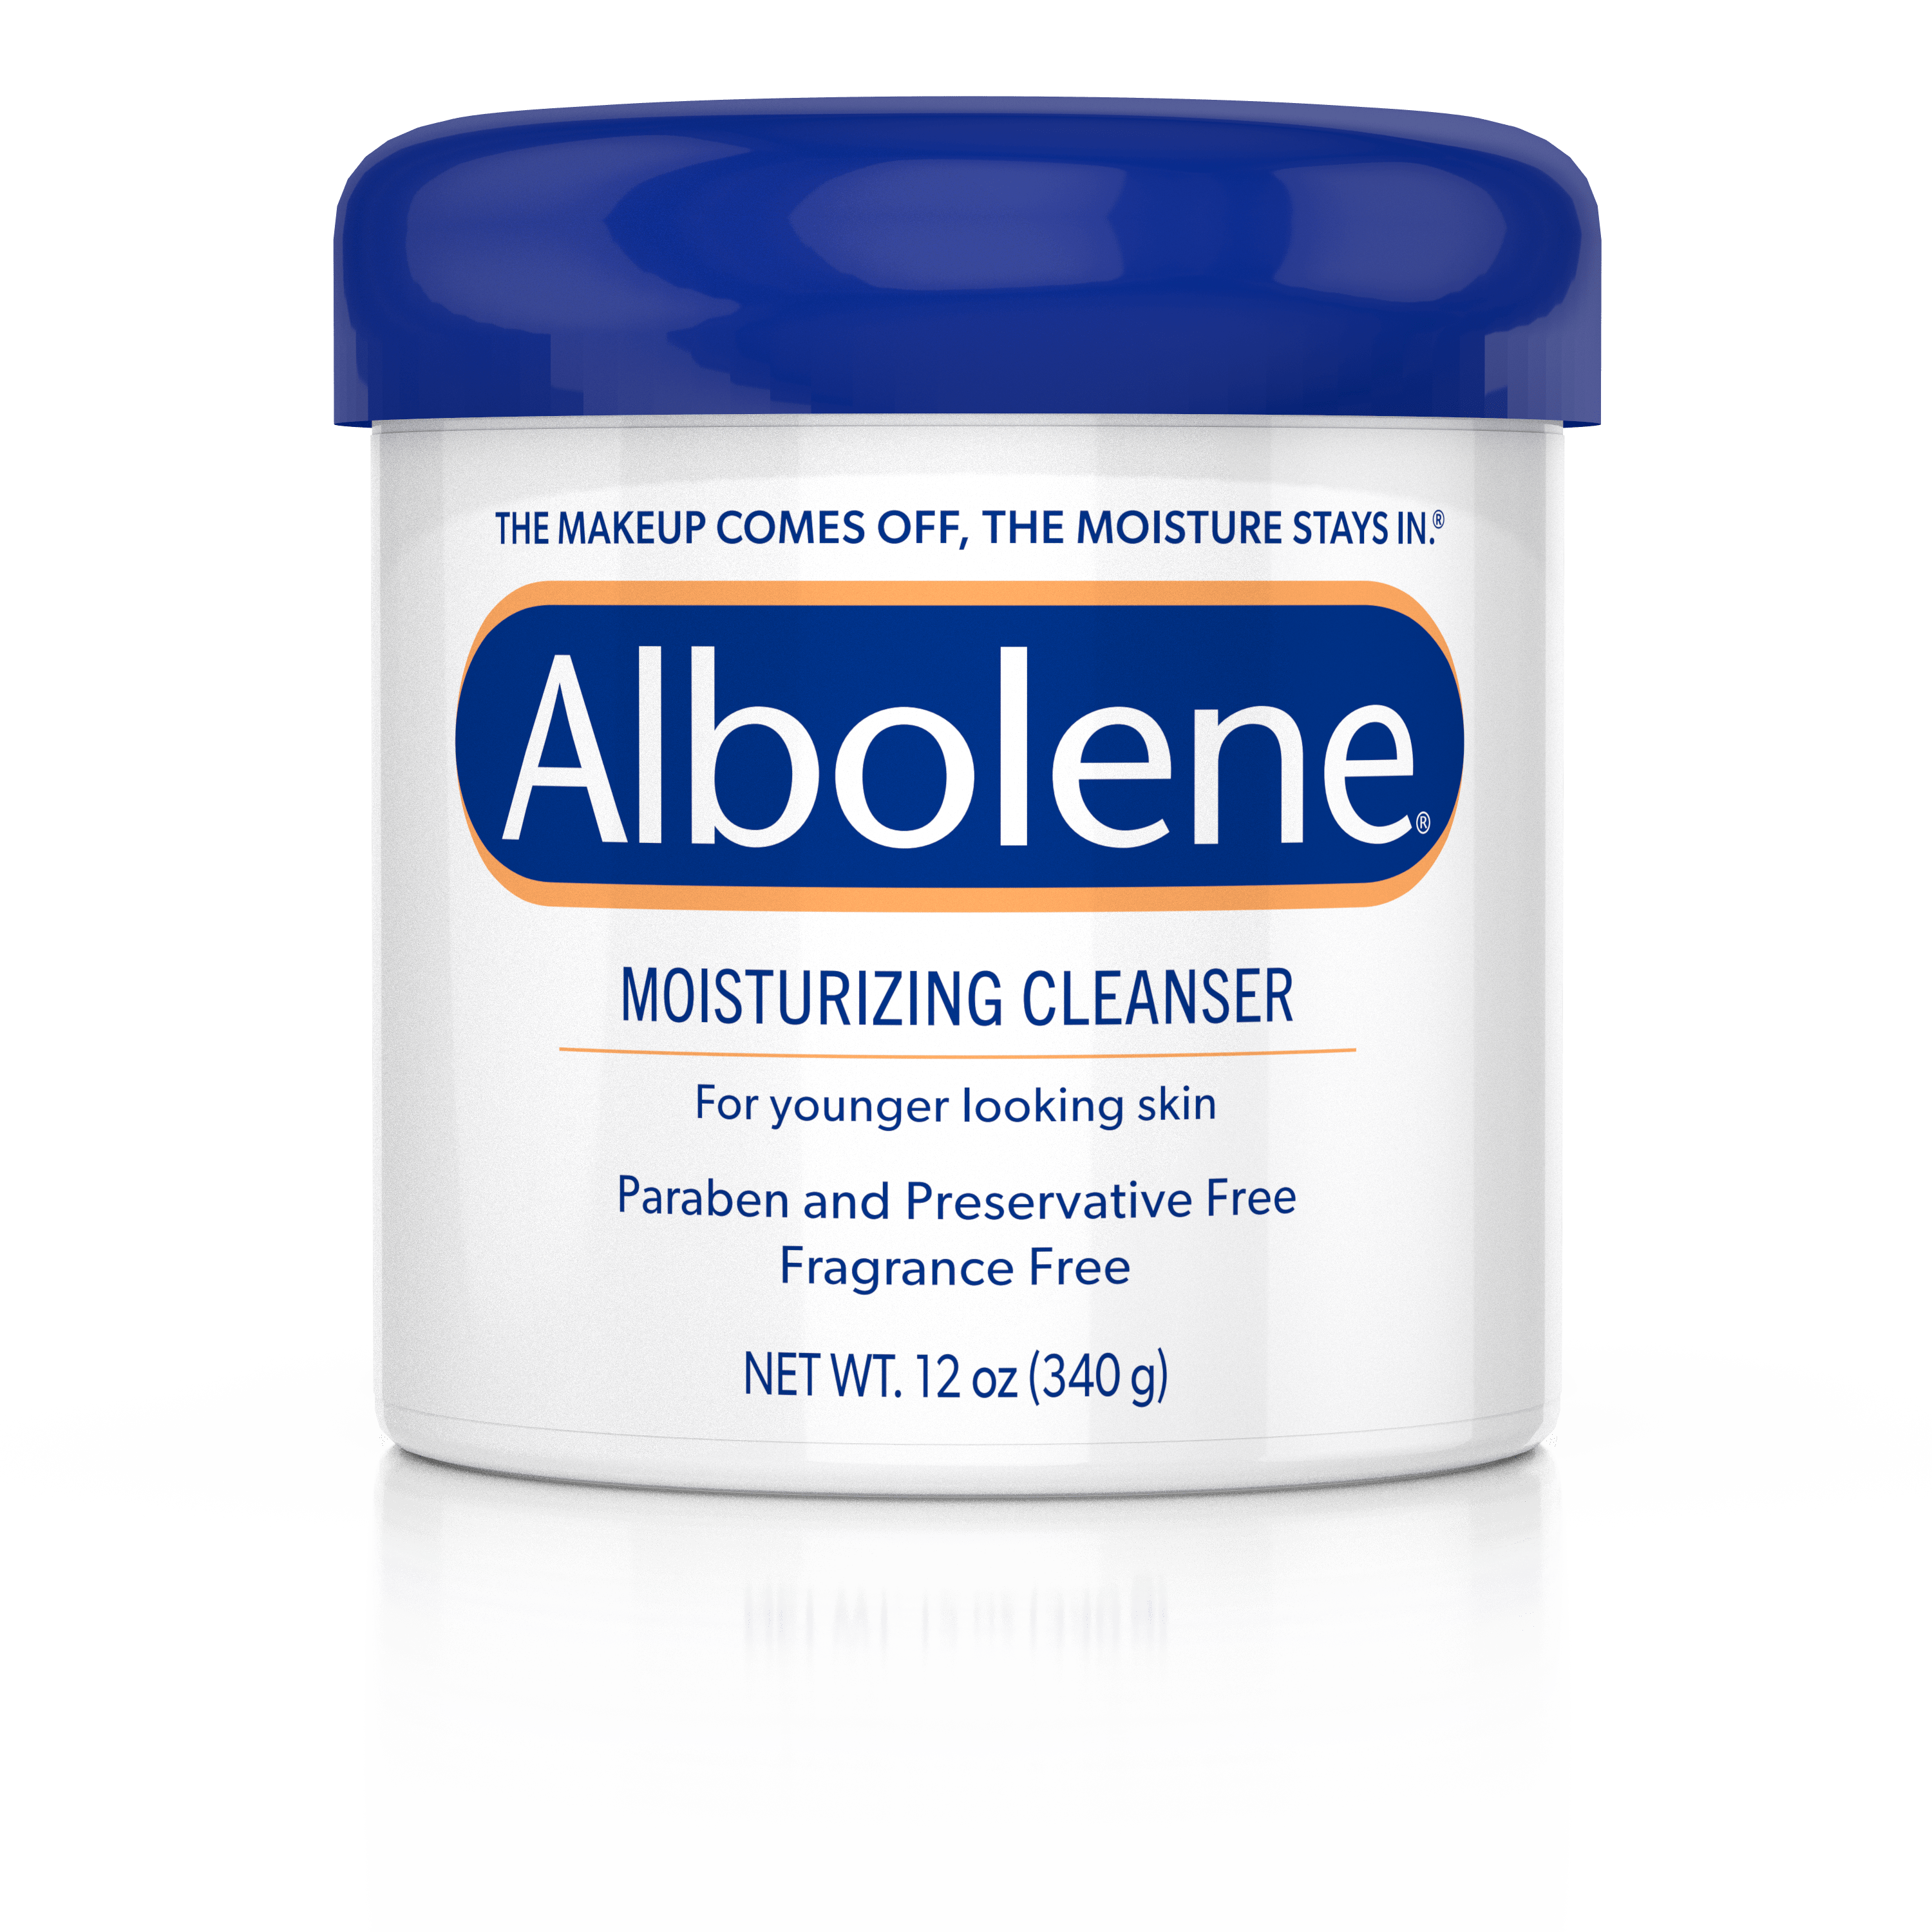 Albolene Face Moisturizer, Facial Cleanser, Makeup Remover and Cleansing Balm, All Skin Types, 12 oz - image 1 of 11